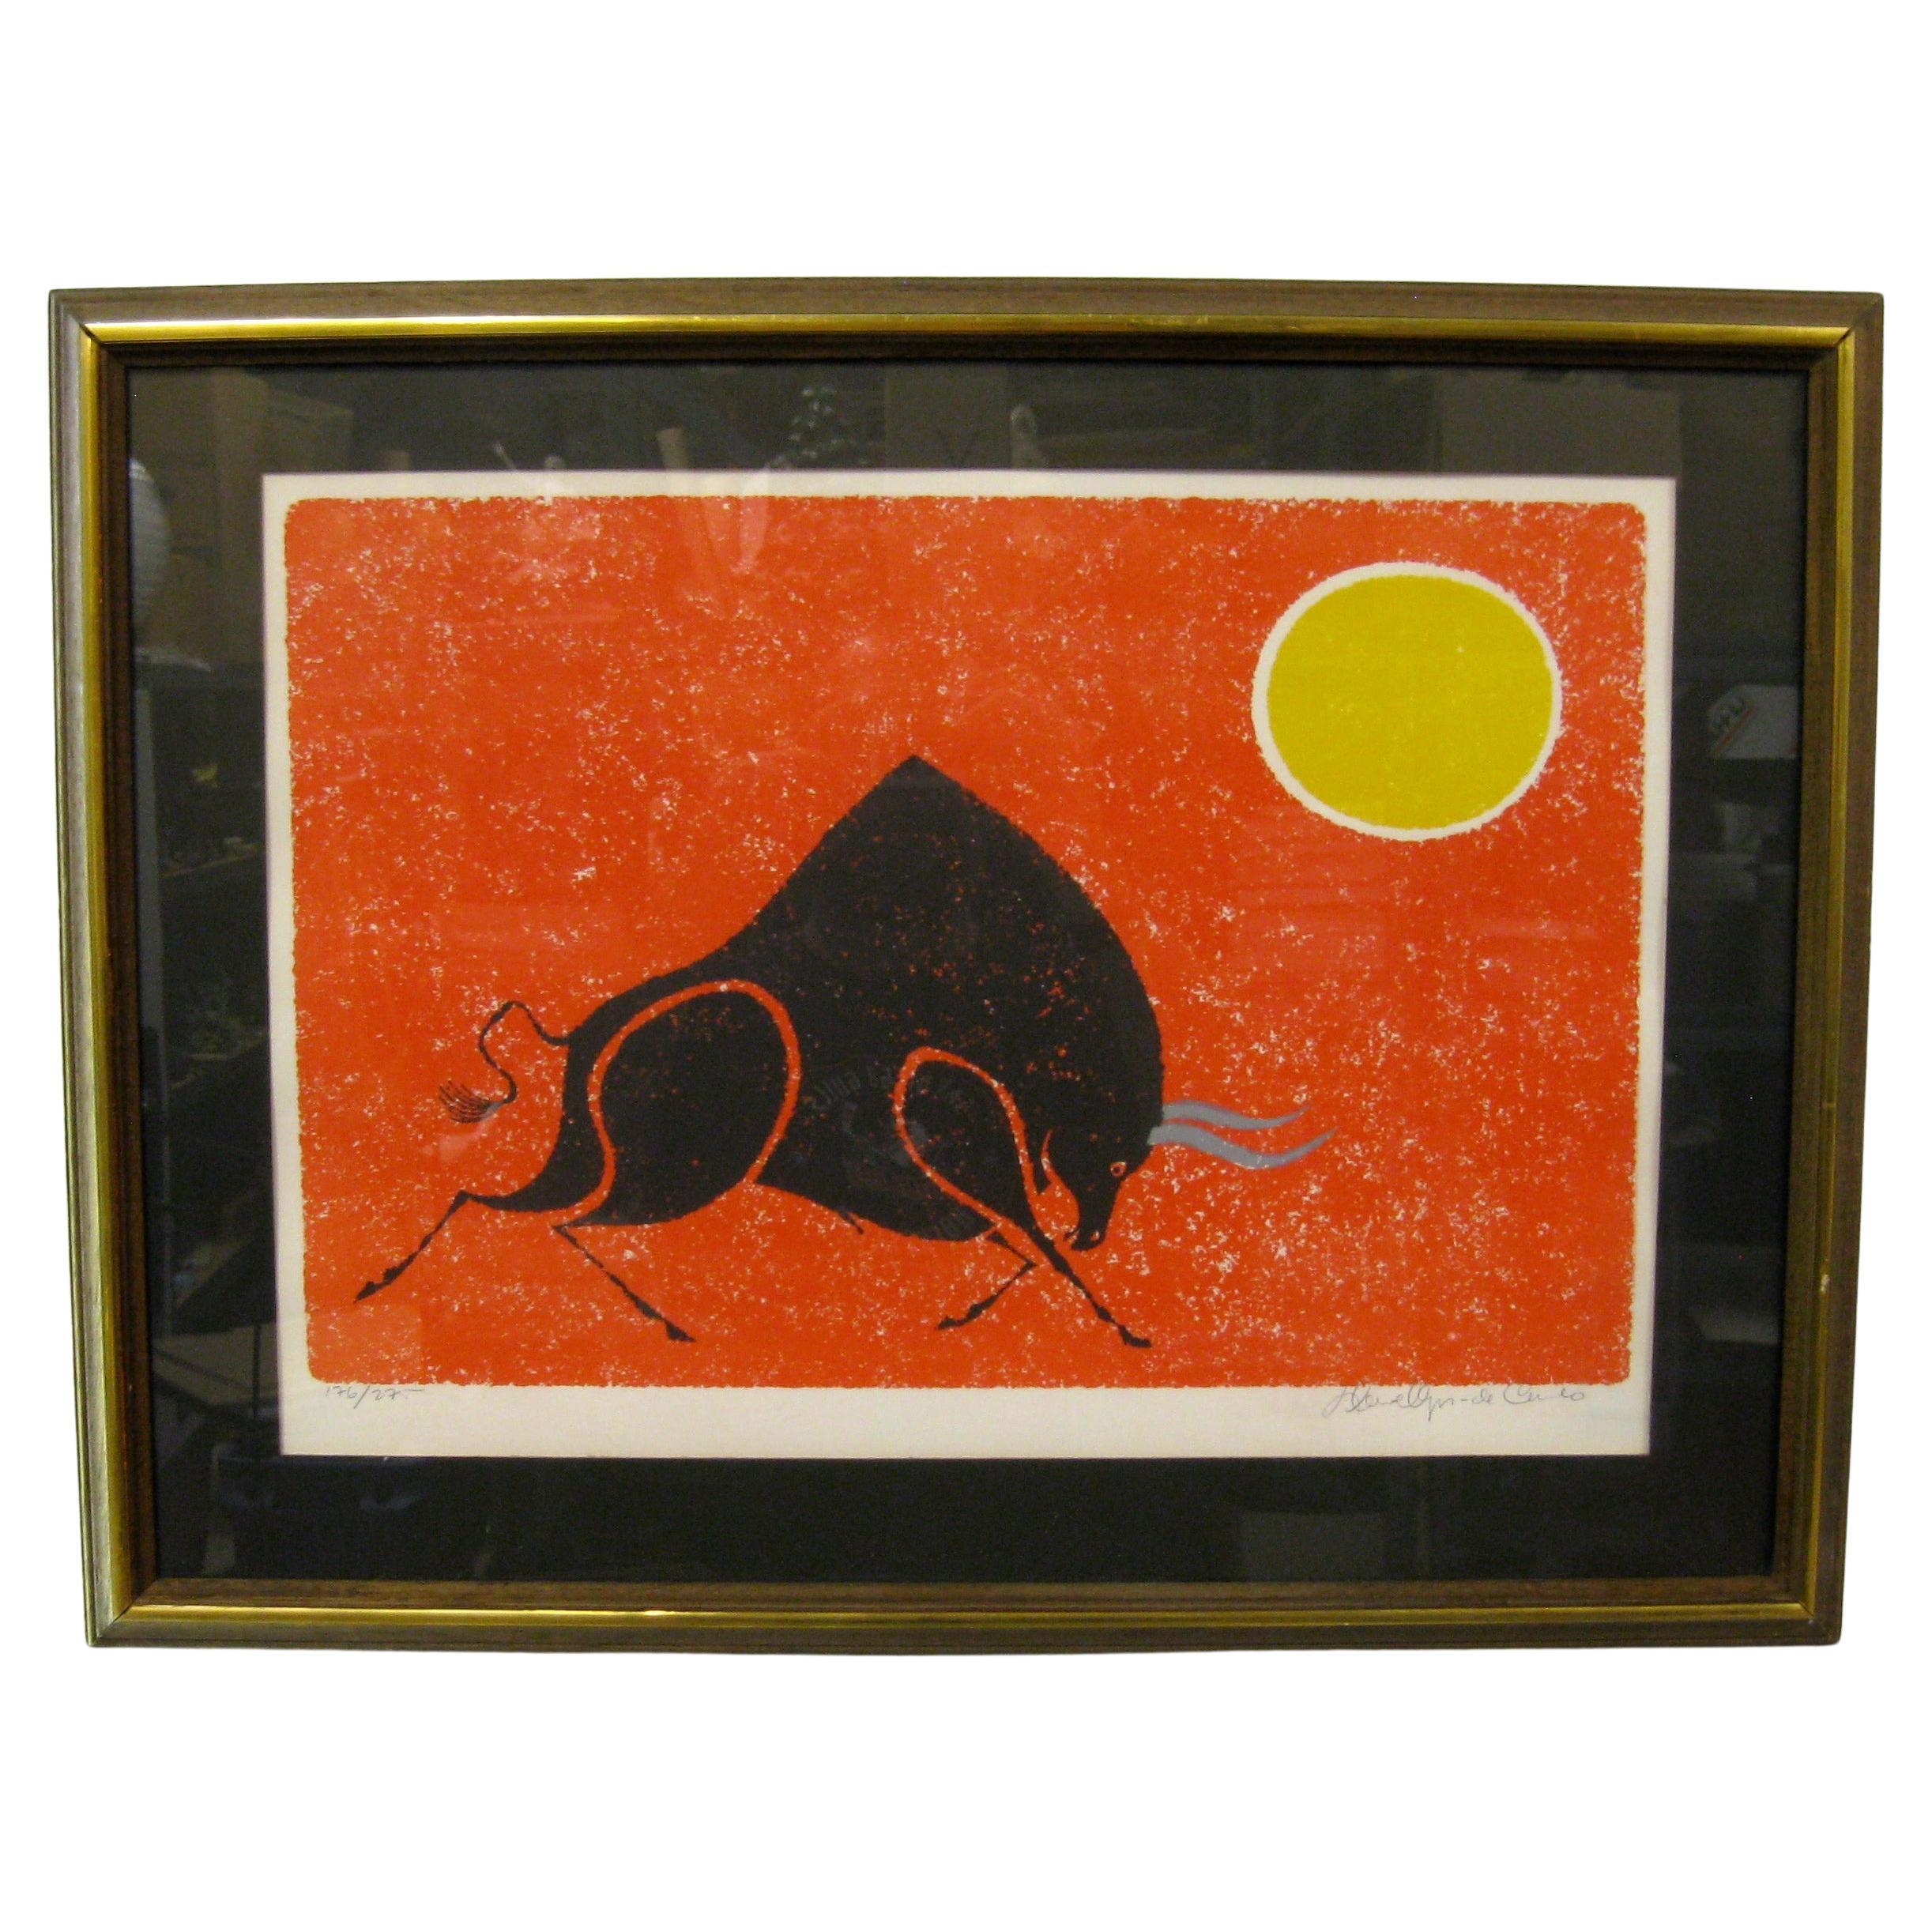 1970's Keith Llewellyn De Carlo Abstract Bull Lithograph Signed & Numbered For Sale